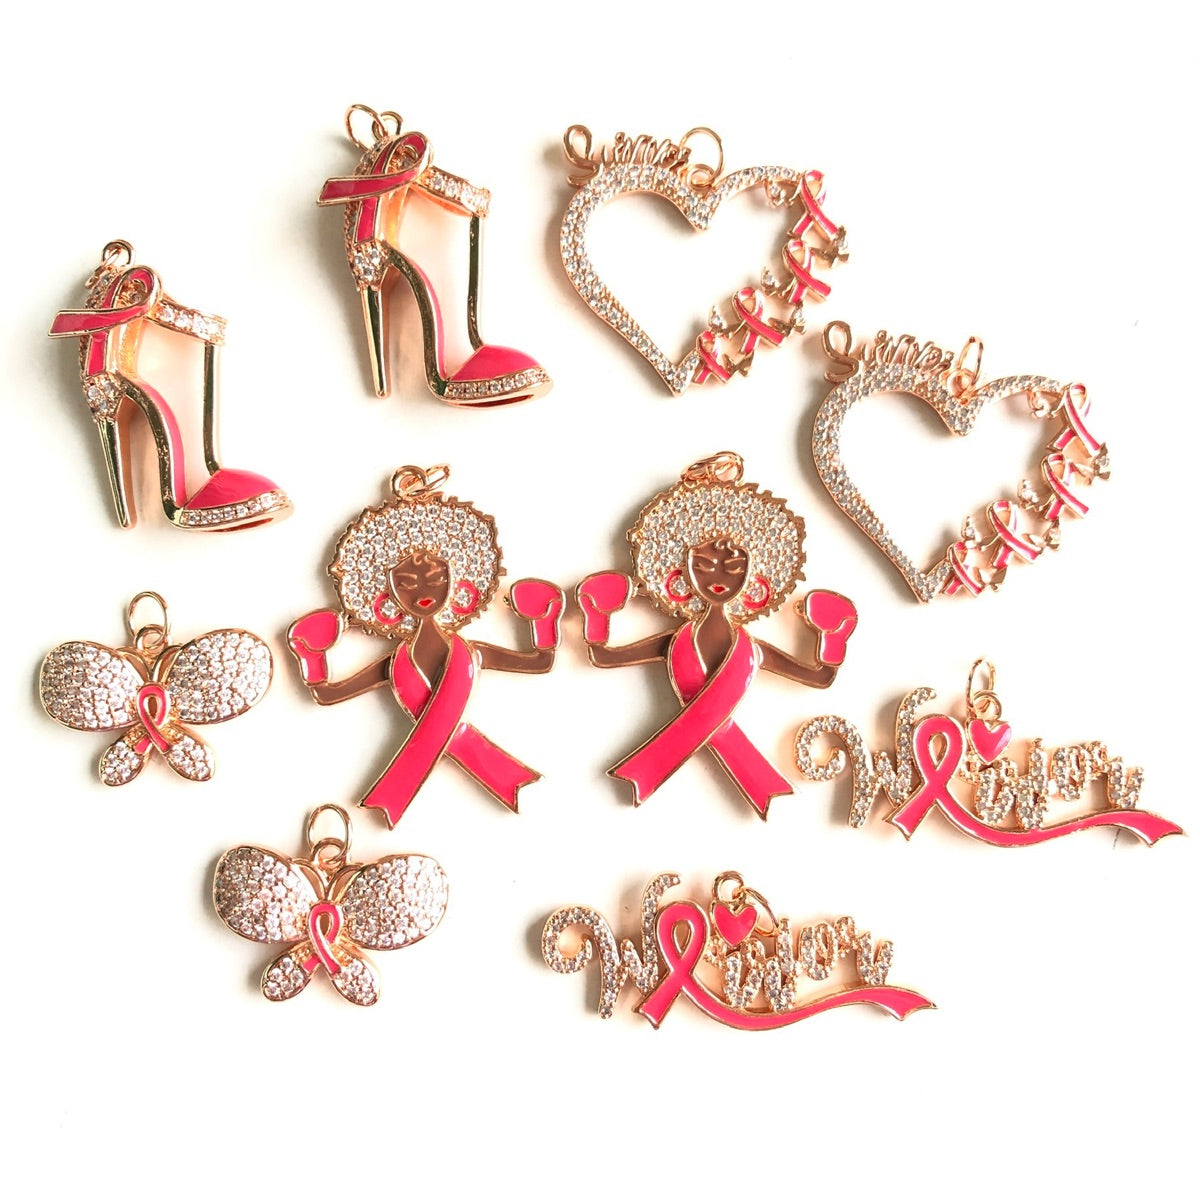 10pcs/lot Pink Ribbon Black Girl Warrior Survivor Heart High Heel Butterfly Breast Cancer Awareness Charms Bundle Rose Gold Set CZ Paved Charms Breast Cancer Awareness Mix Charms New Charms Arrivals Charms Beads Beyond